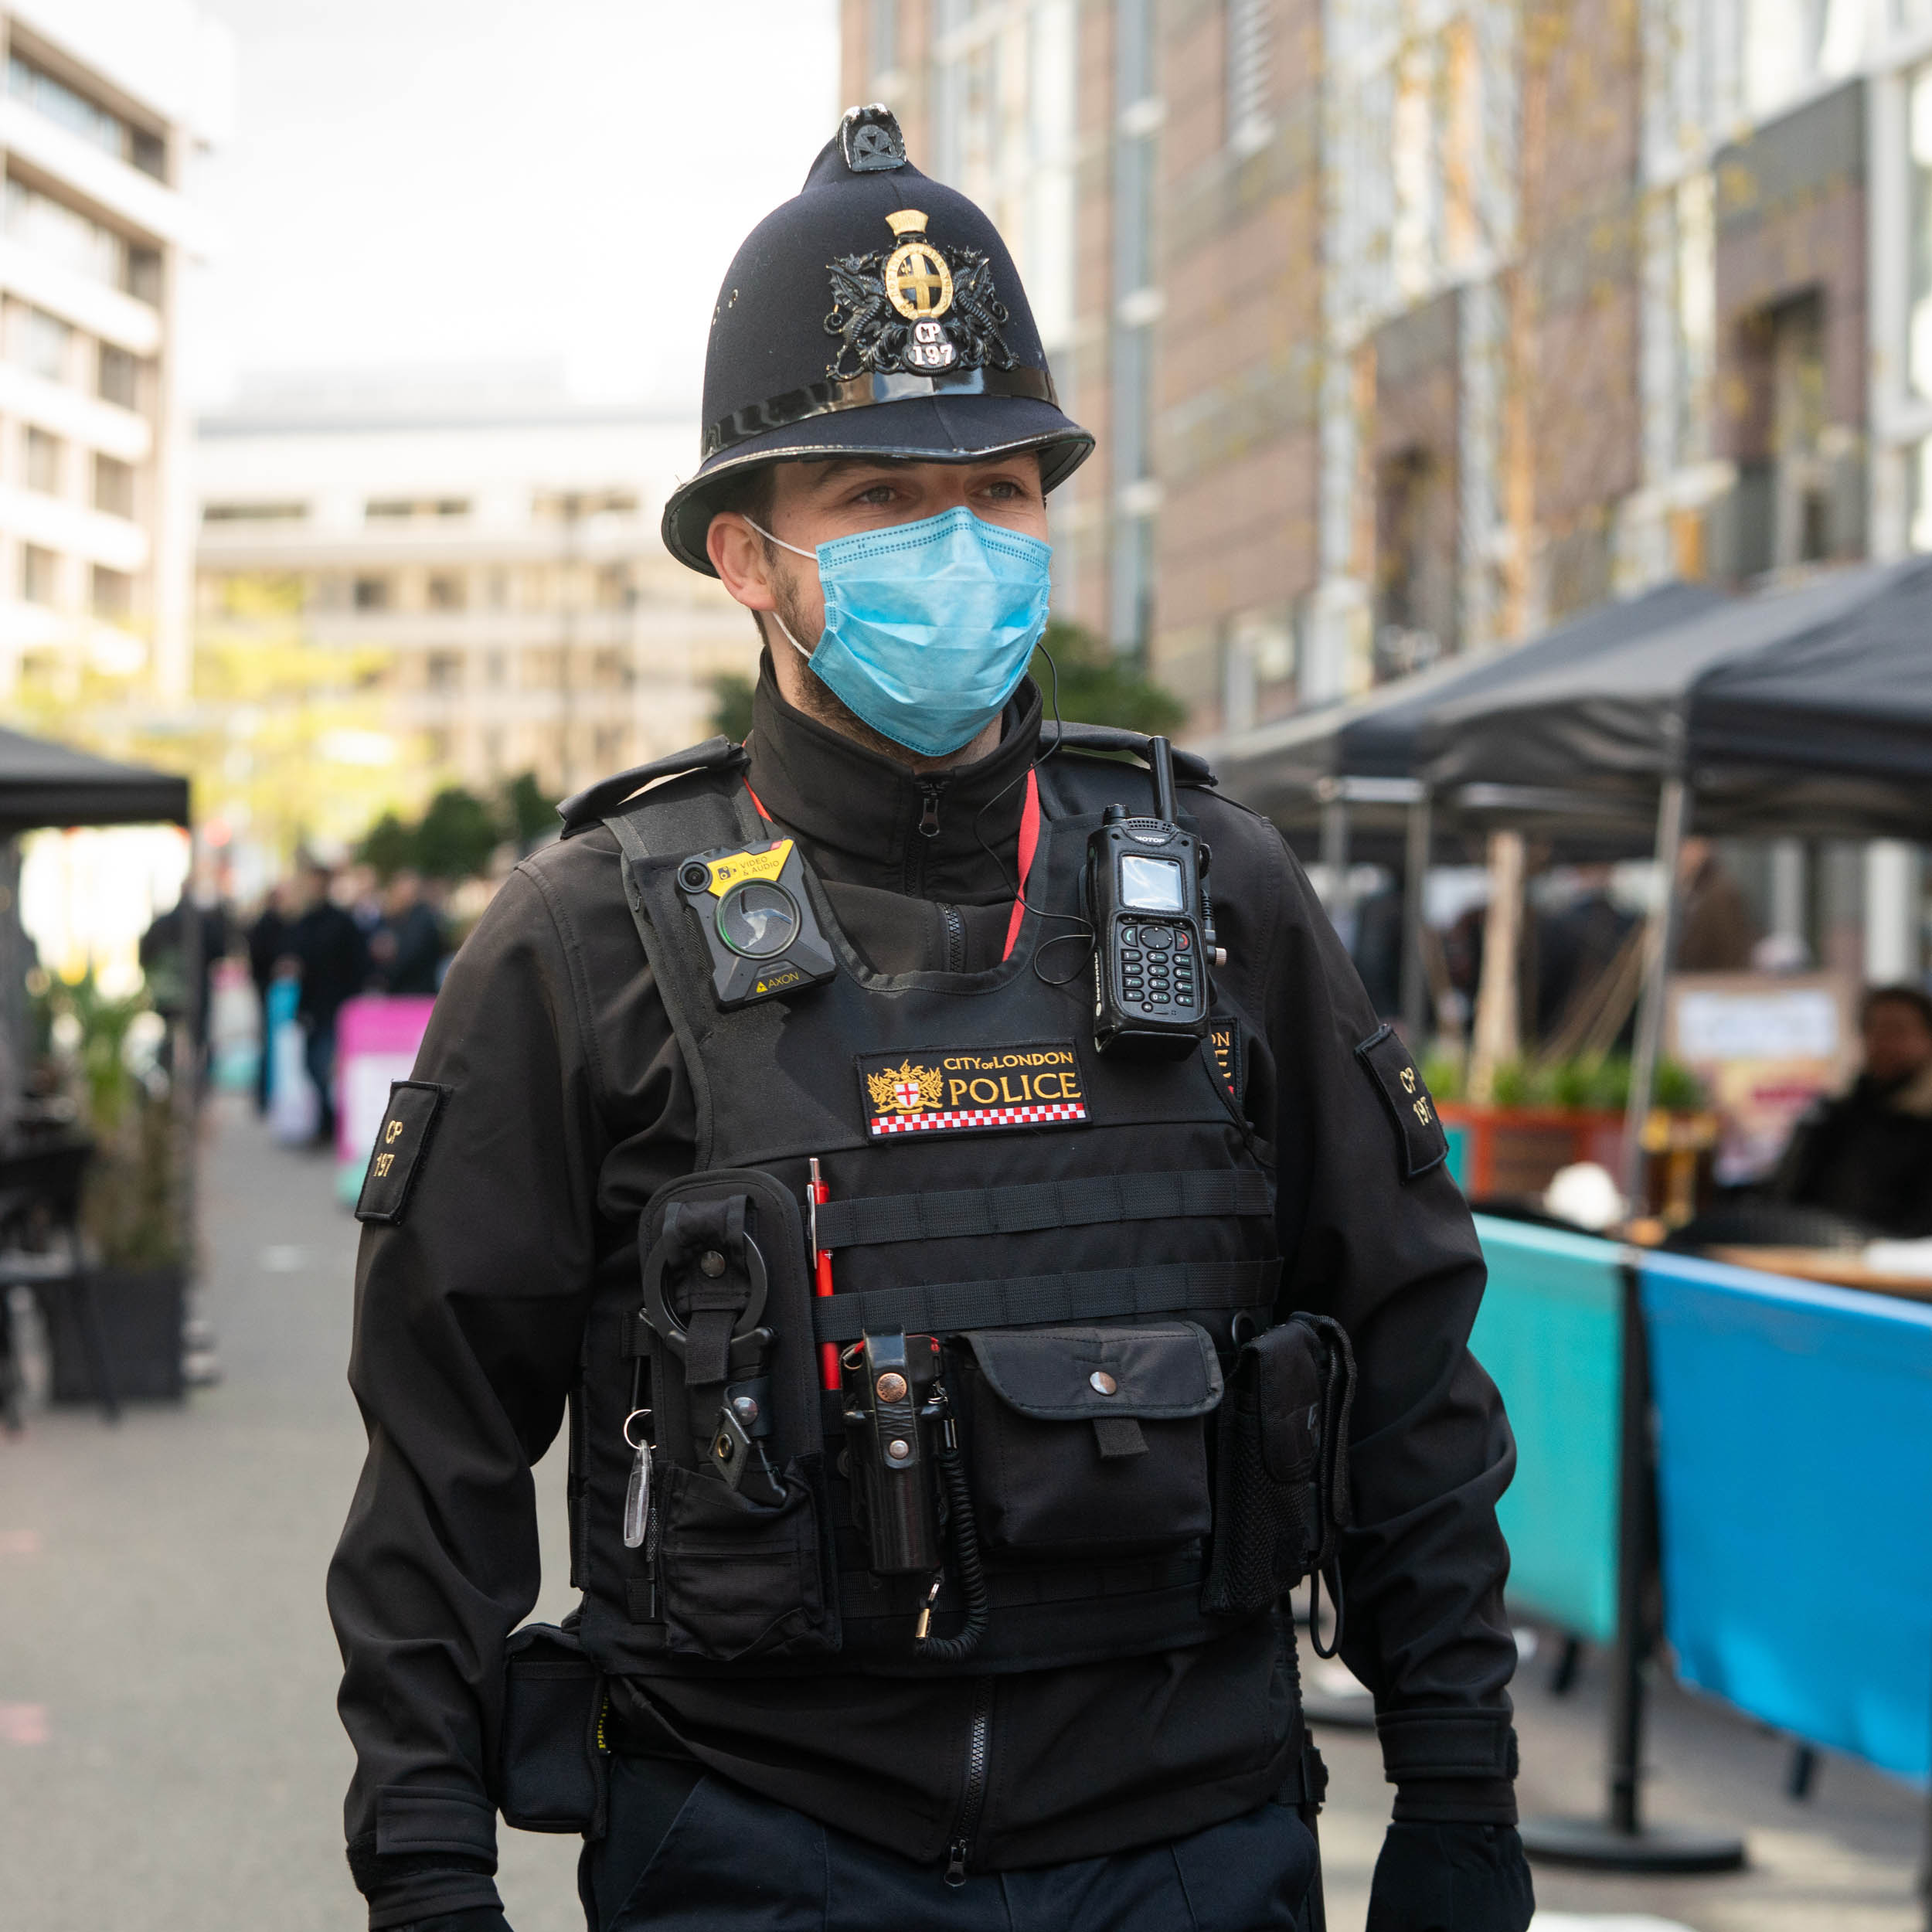 Have your say: City of London Police Annual Community Survey